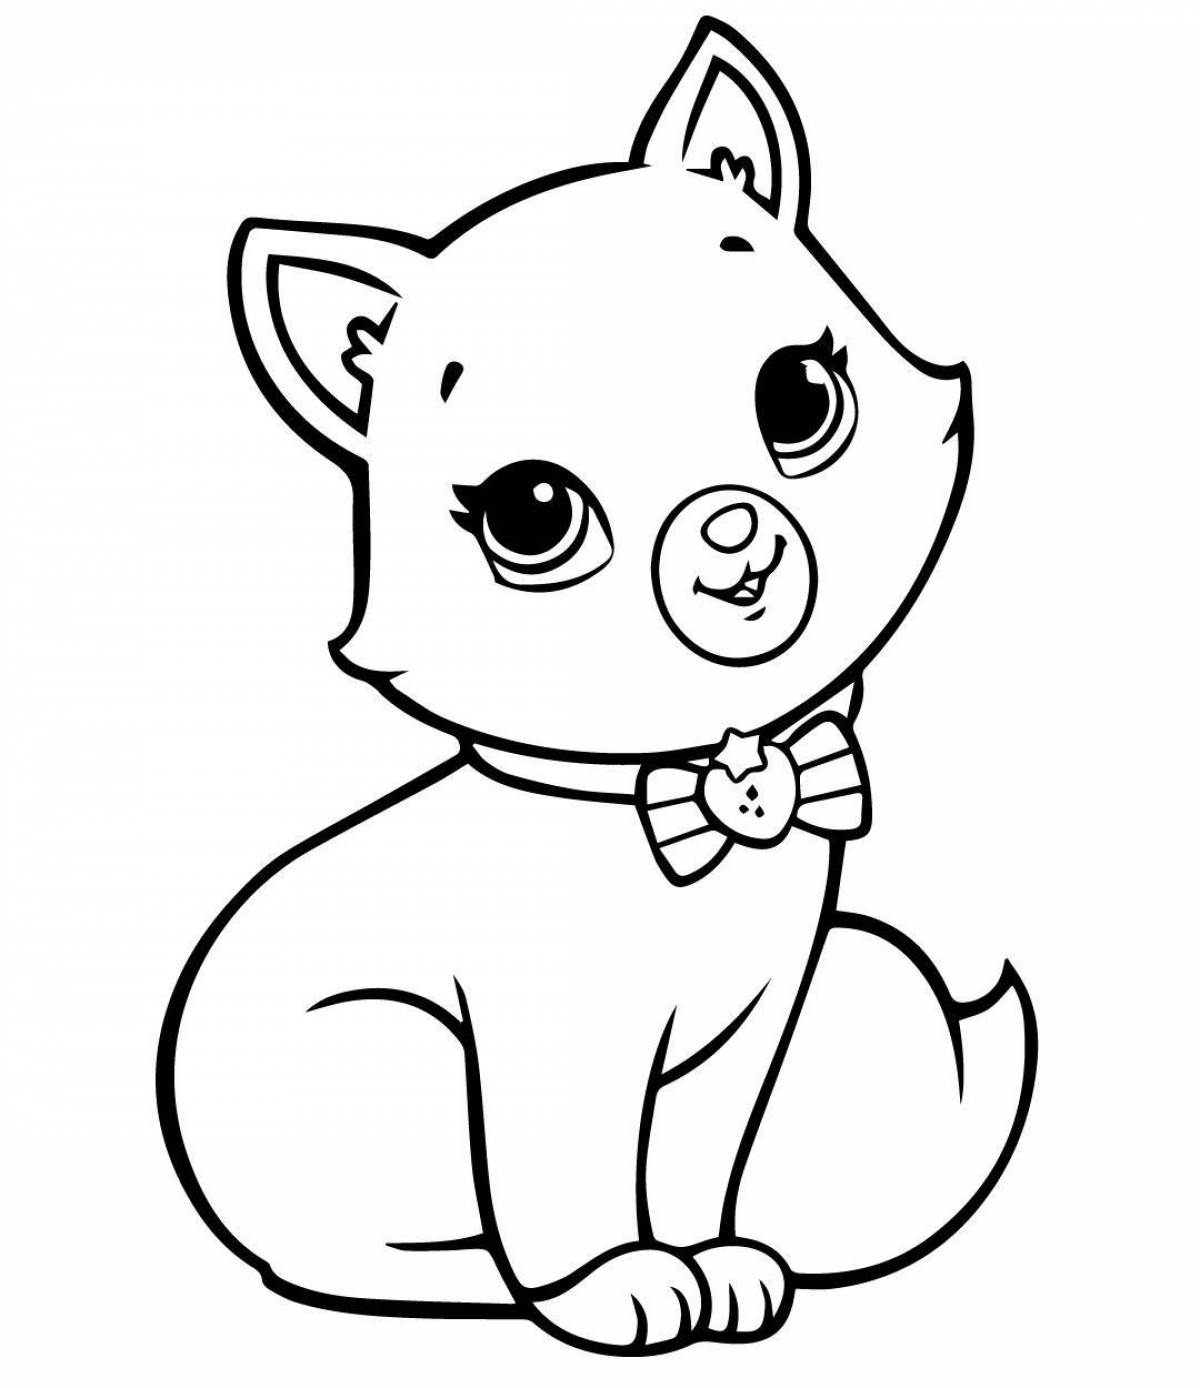 Kitty grinning coloring book